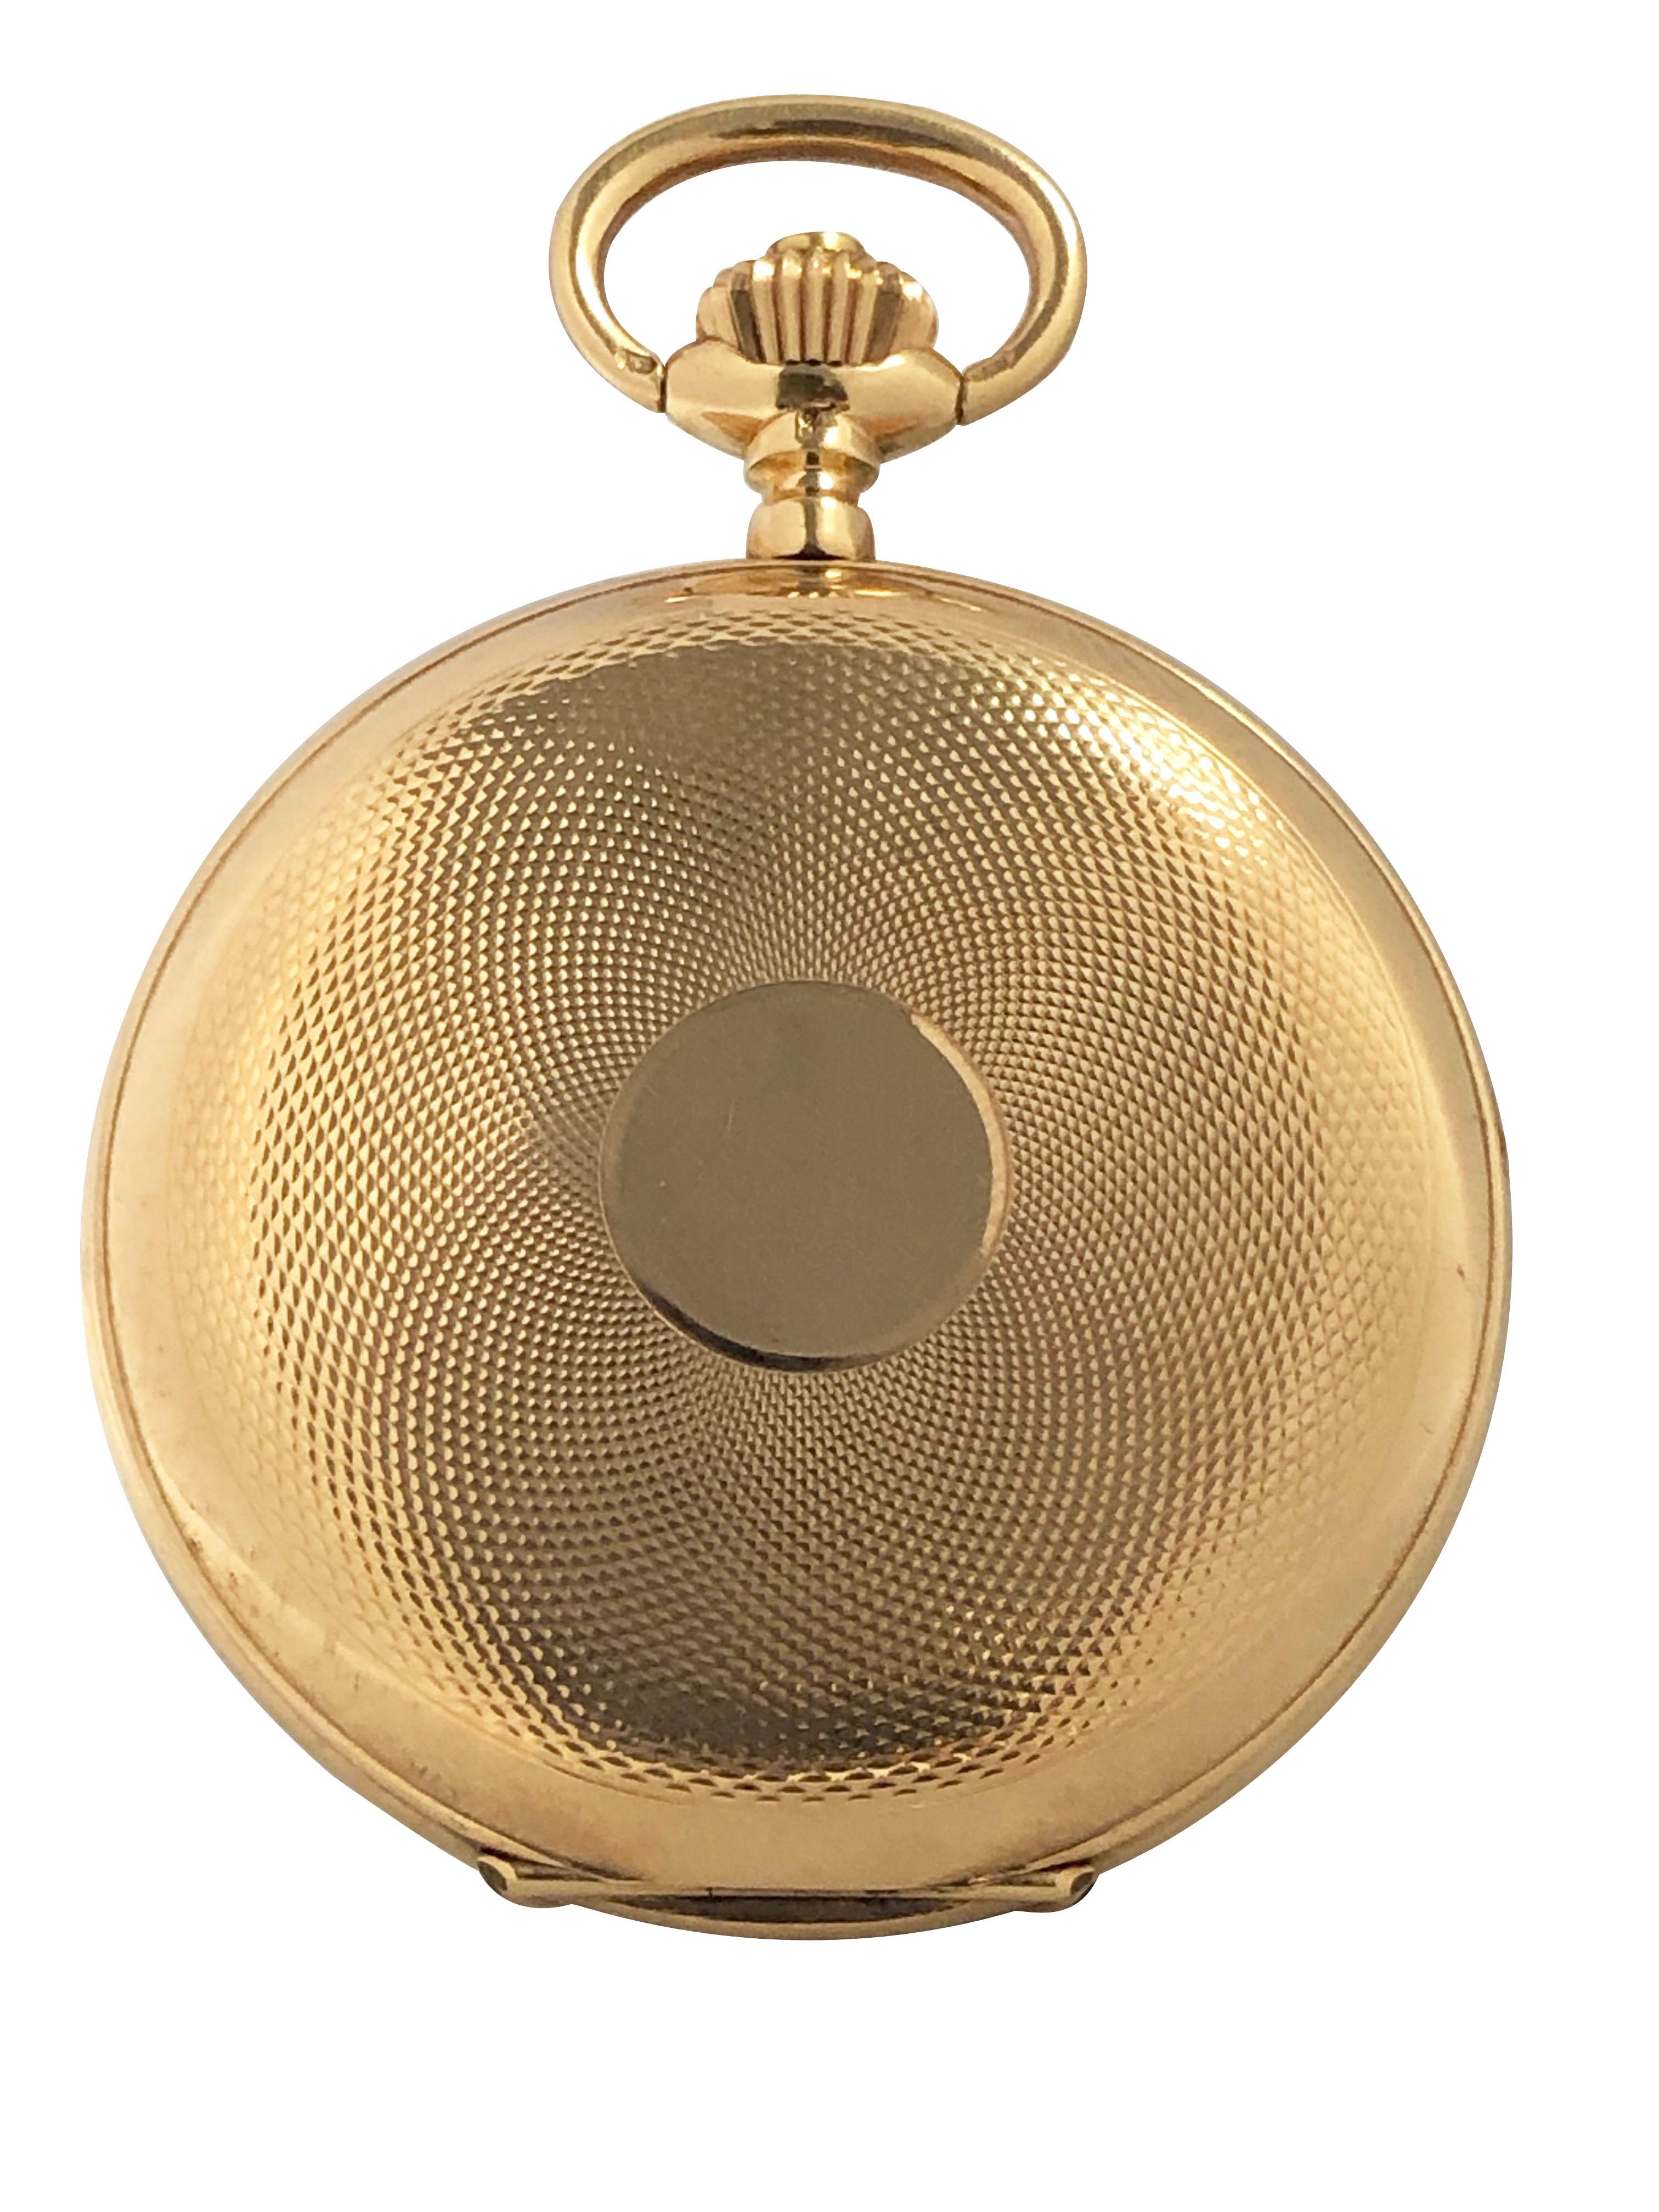 Circa 1900 I.W.C.  International Watch Company, Schaffhausen Hunting Case Pocket Watch, 14k Yellow Gold 50 M.M. Hunting case with inside dust cover. Engine turned Front and Back covers. Lever set Gilt metal movement. Double sunk Porcelain dial with